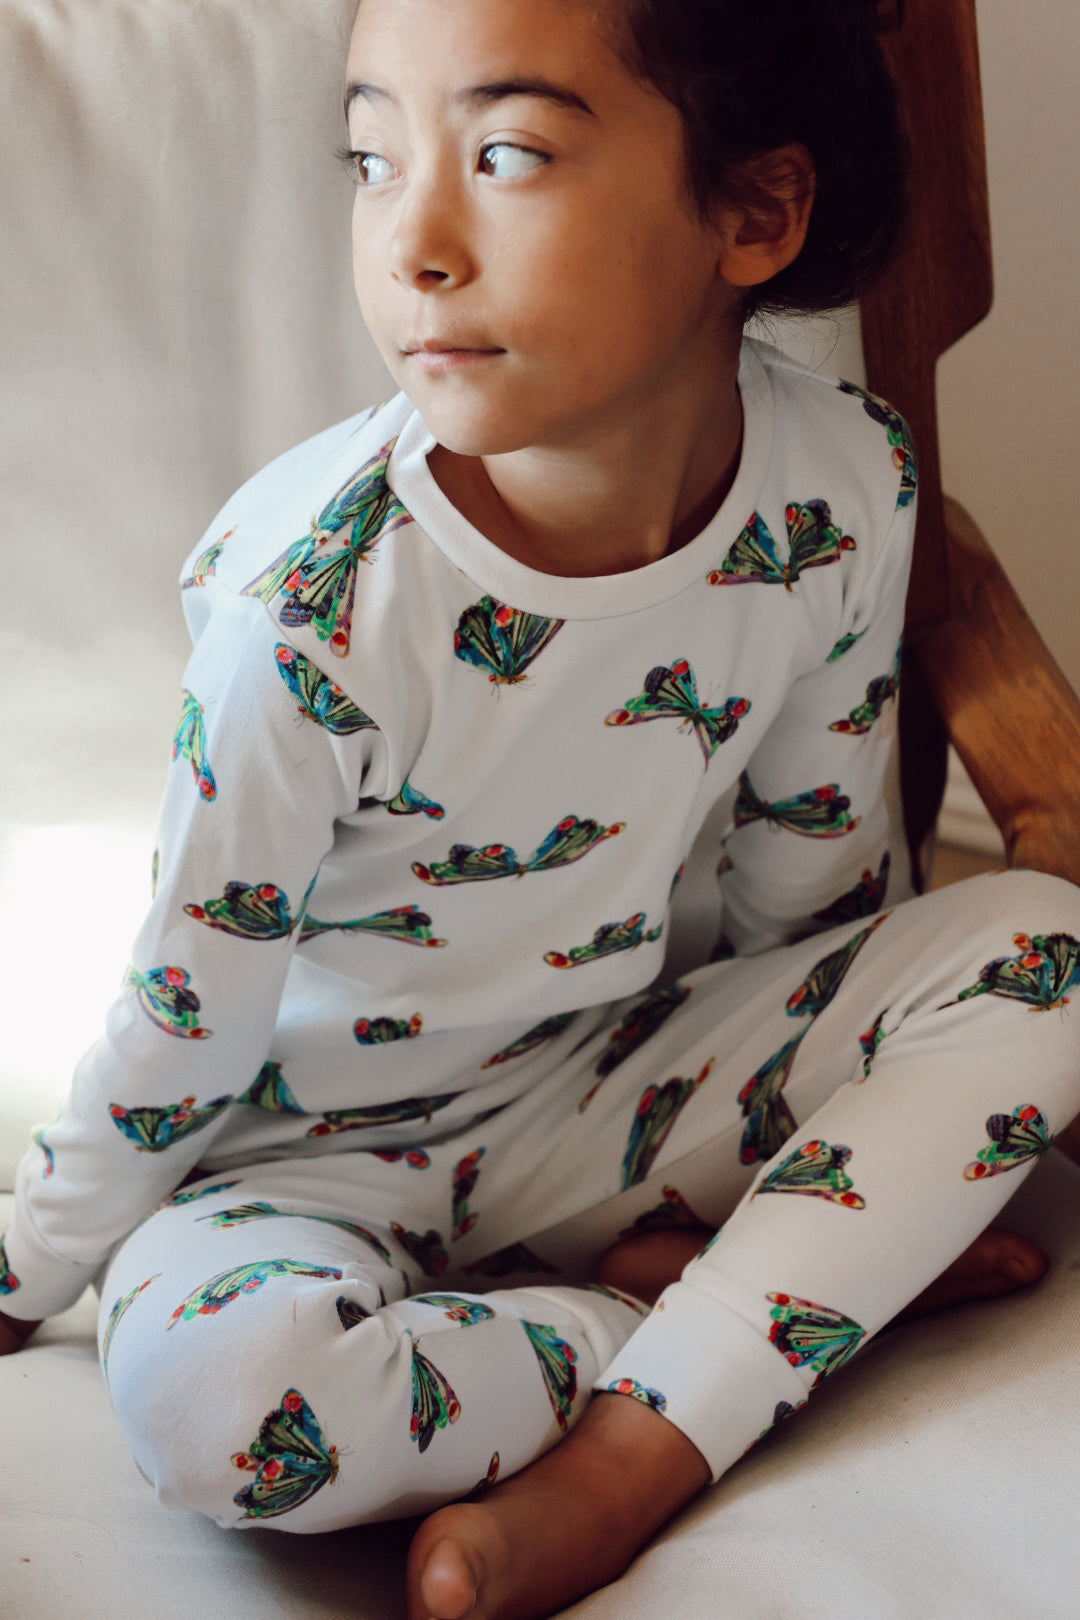 image of girl sitting on floor wearing the kids' pj set in butterfly print from very hungry caterpillar collection